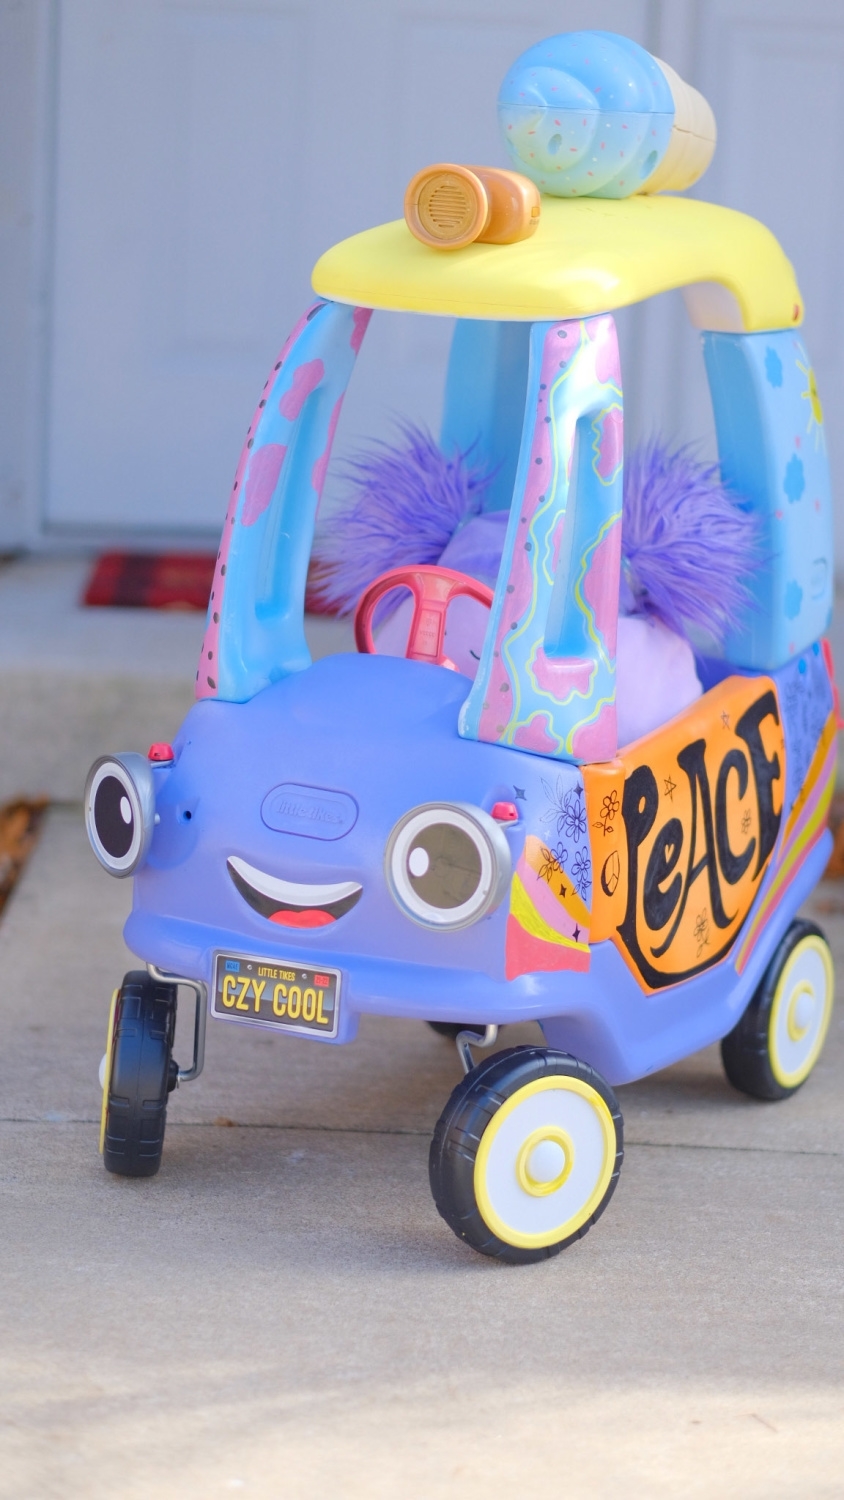 Kid’s Ride-On Car with Spray Paint and Markers